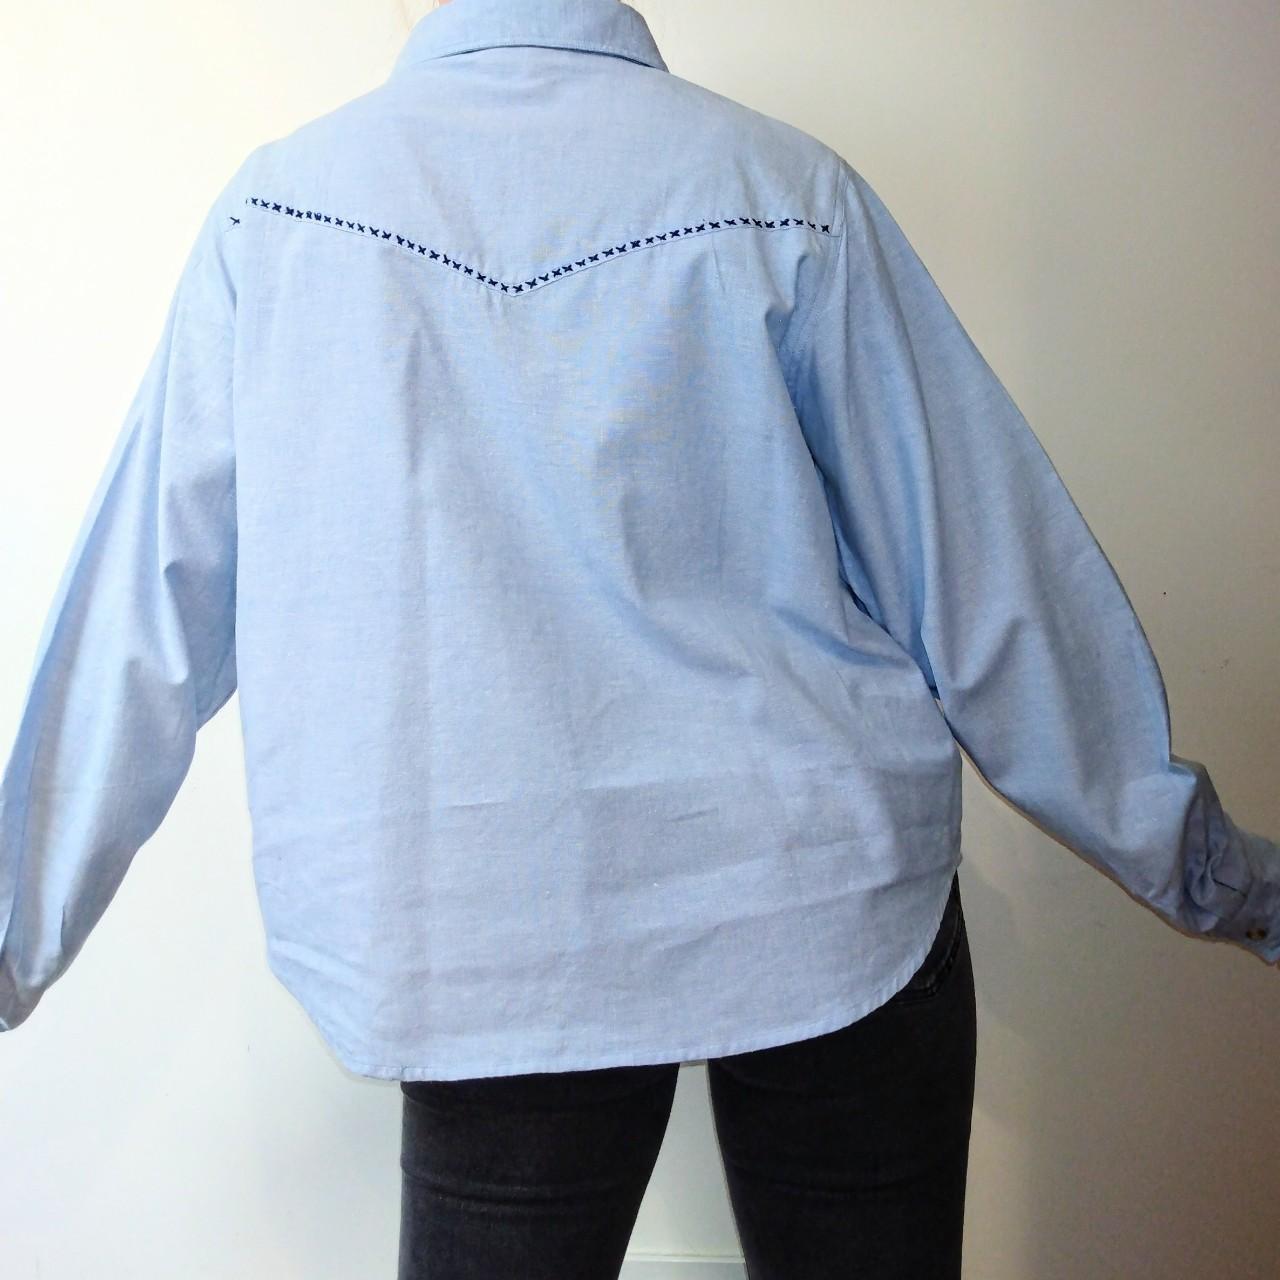 Product Image 3 - 90s Western Button Down

pale blue